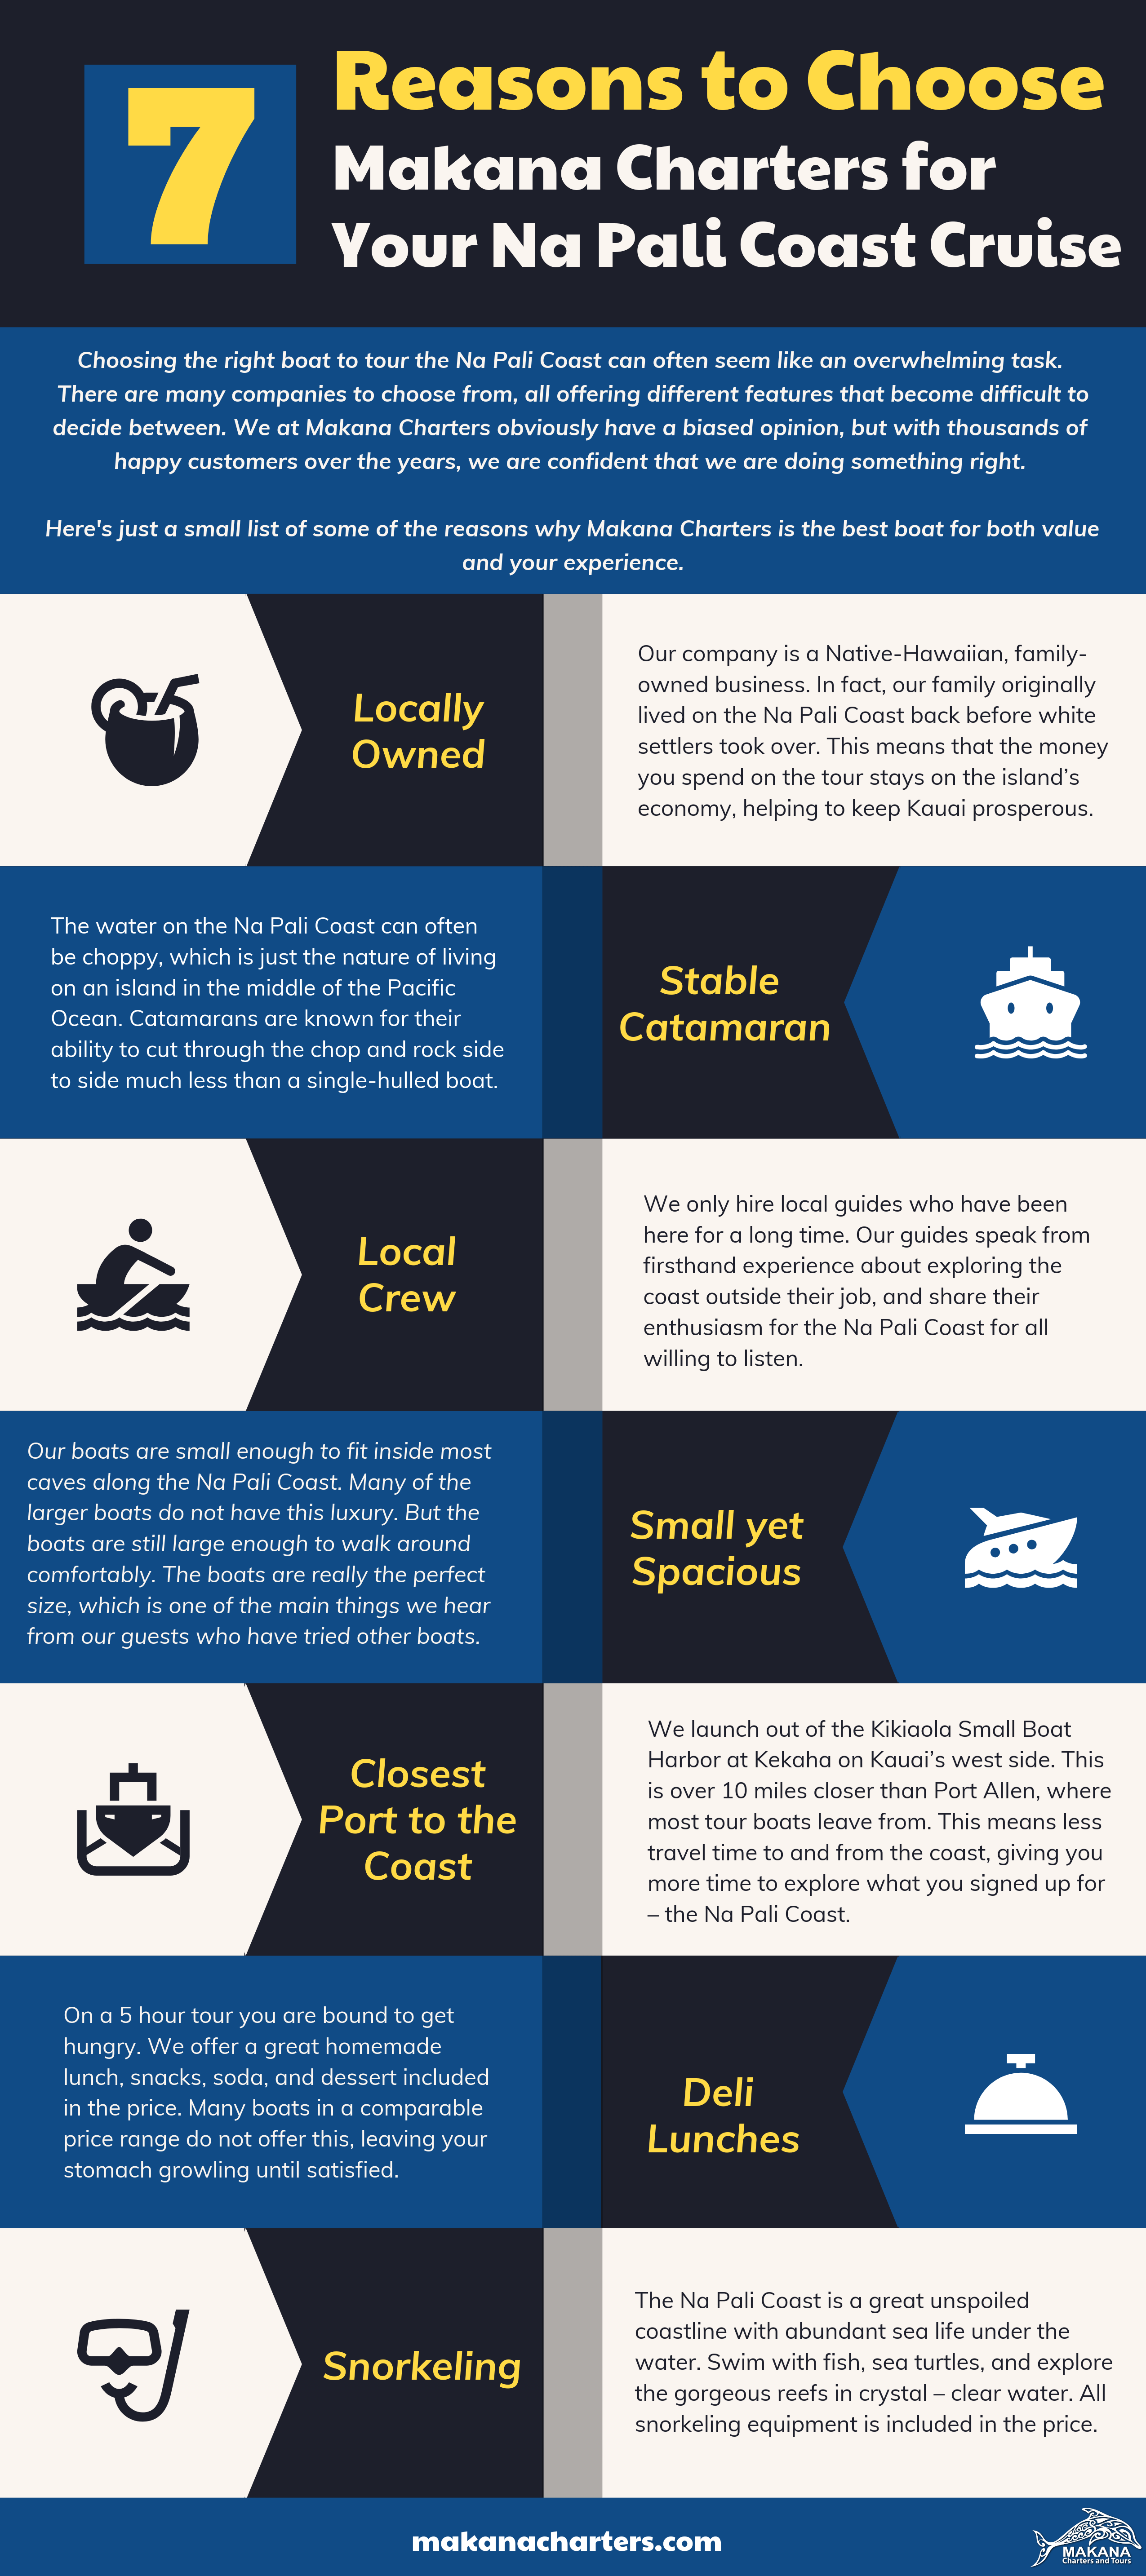 7 Reasons to Choose Makana Charters for Your Na Pali Coast Cruise [Infographic]